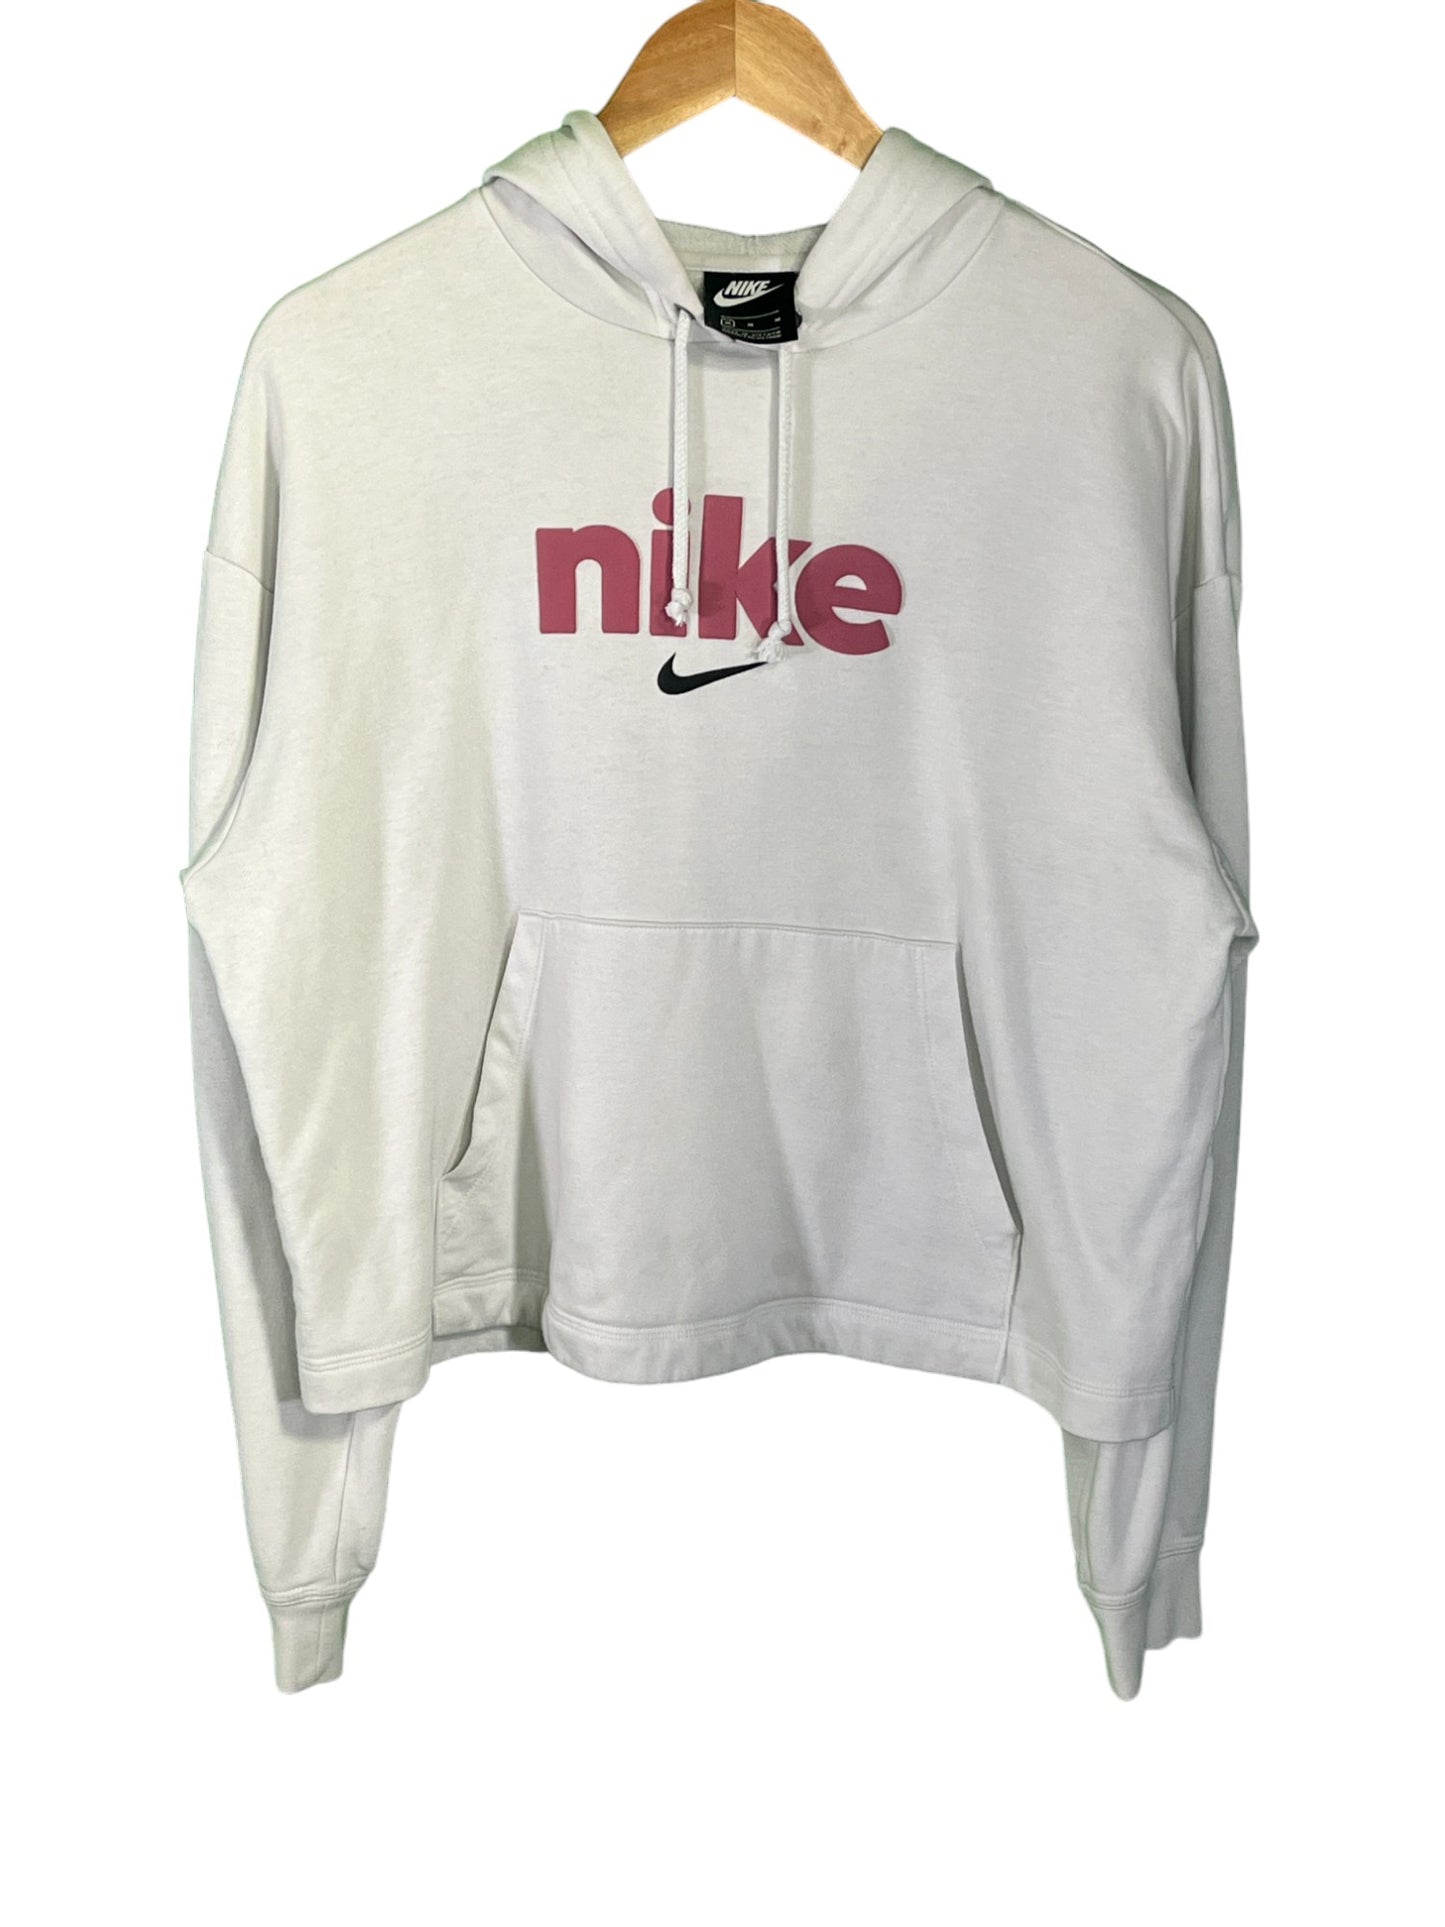 Nike Cropped Spellout Classic Swoosh Logo Hoodie Size Medium